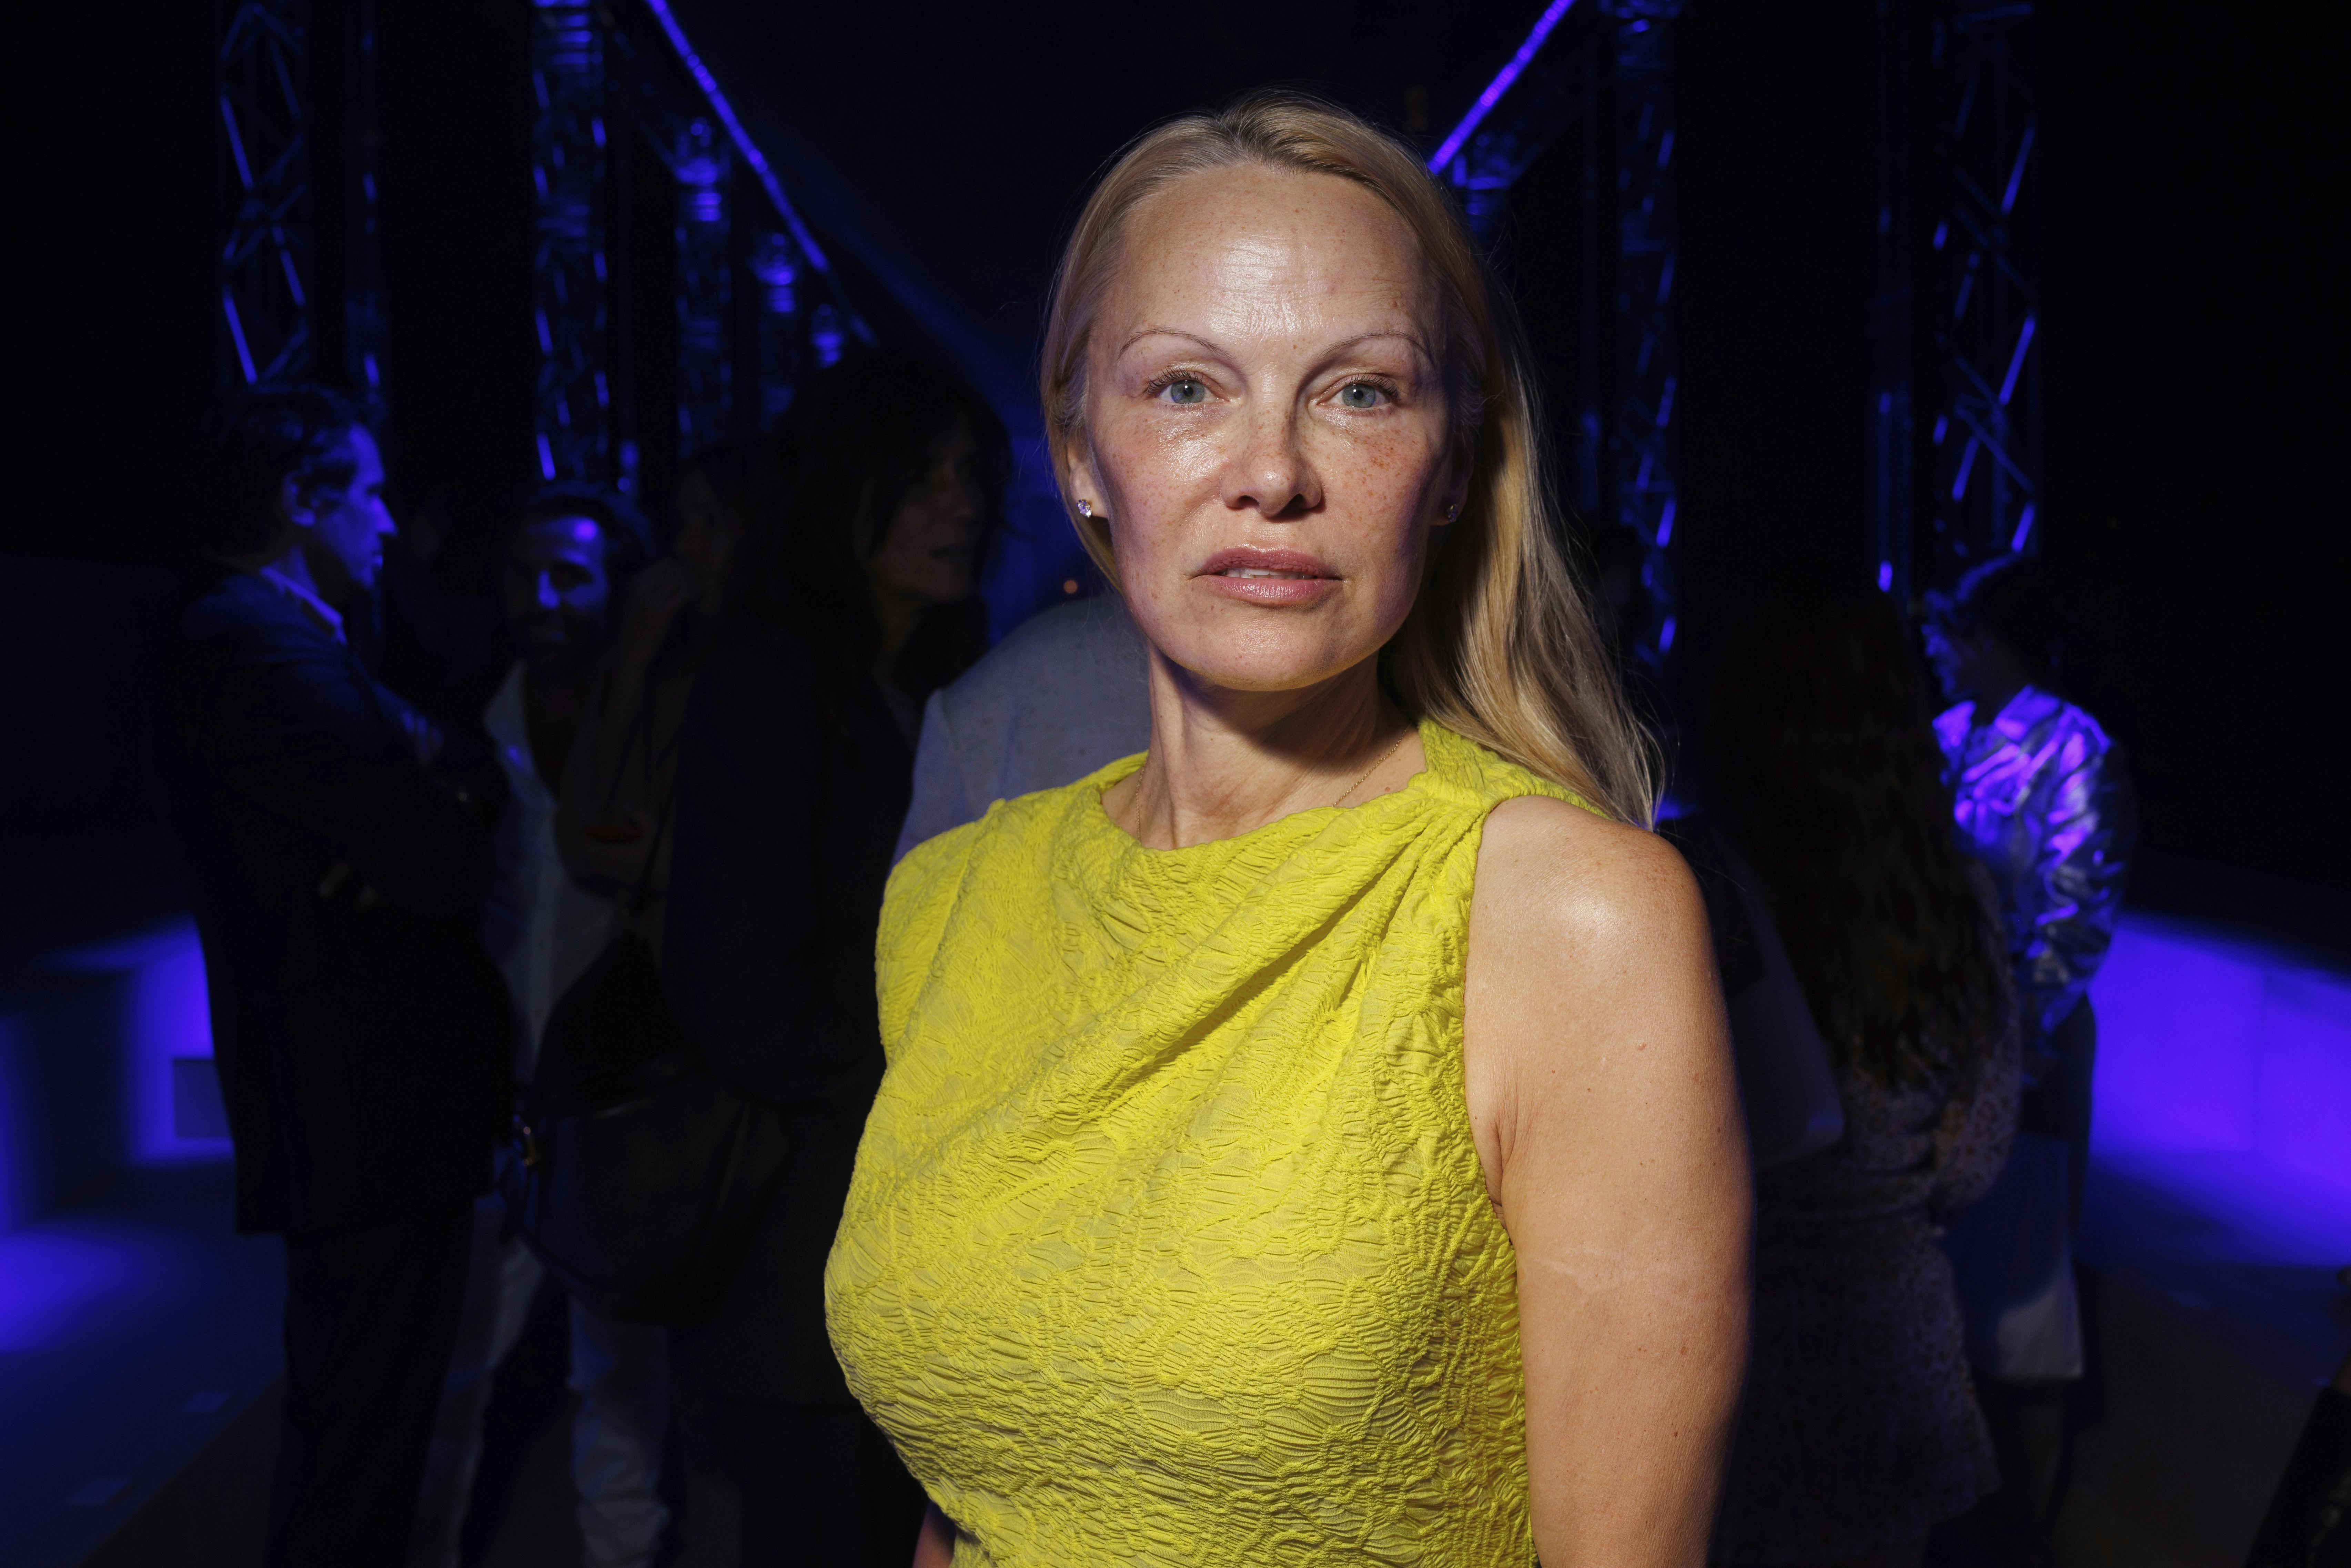 Pamela Anderson attends the Isabel Marant Spring/Summer 2024 womenswear fashion collection presented Thursday, Sept. 28, 2023 in Paris. (AP Photo/Vianney Le Caer)